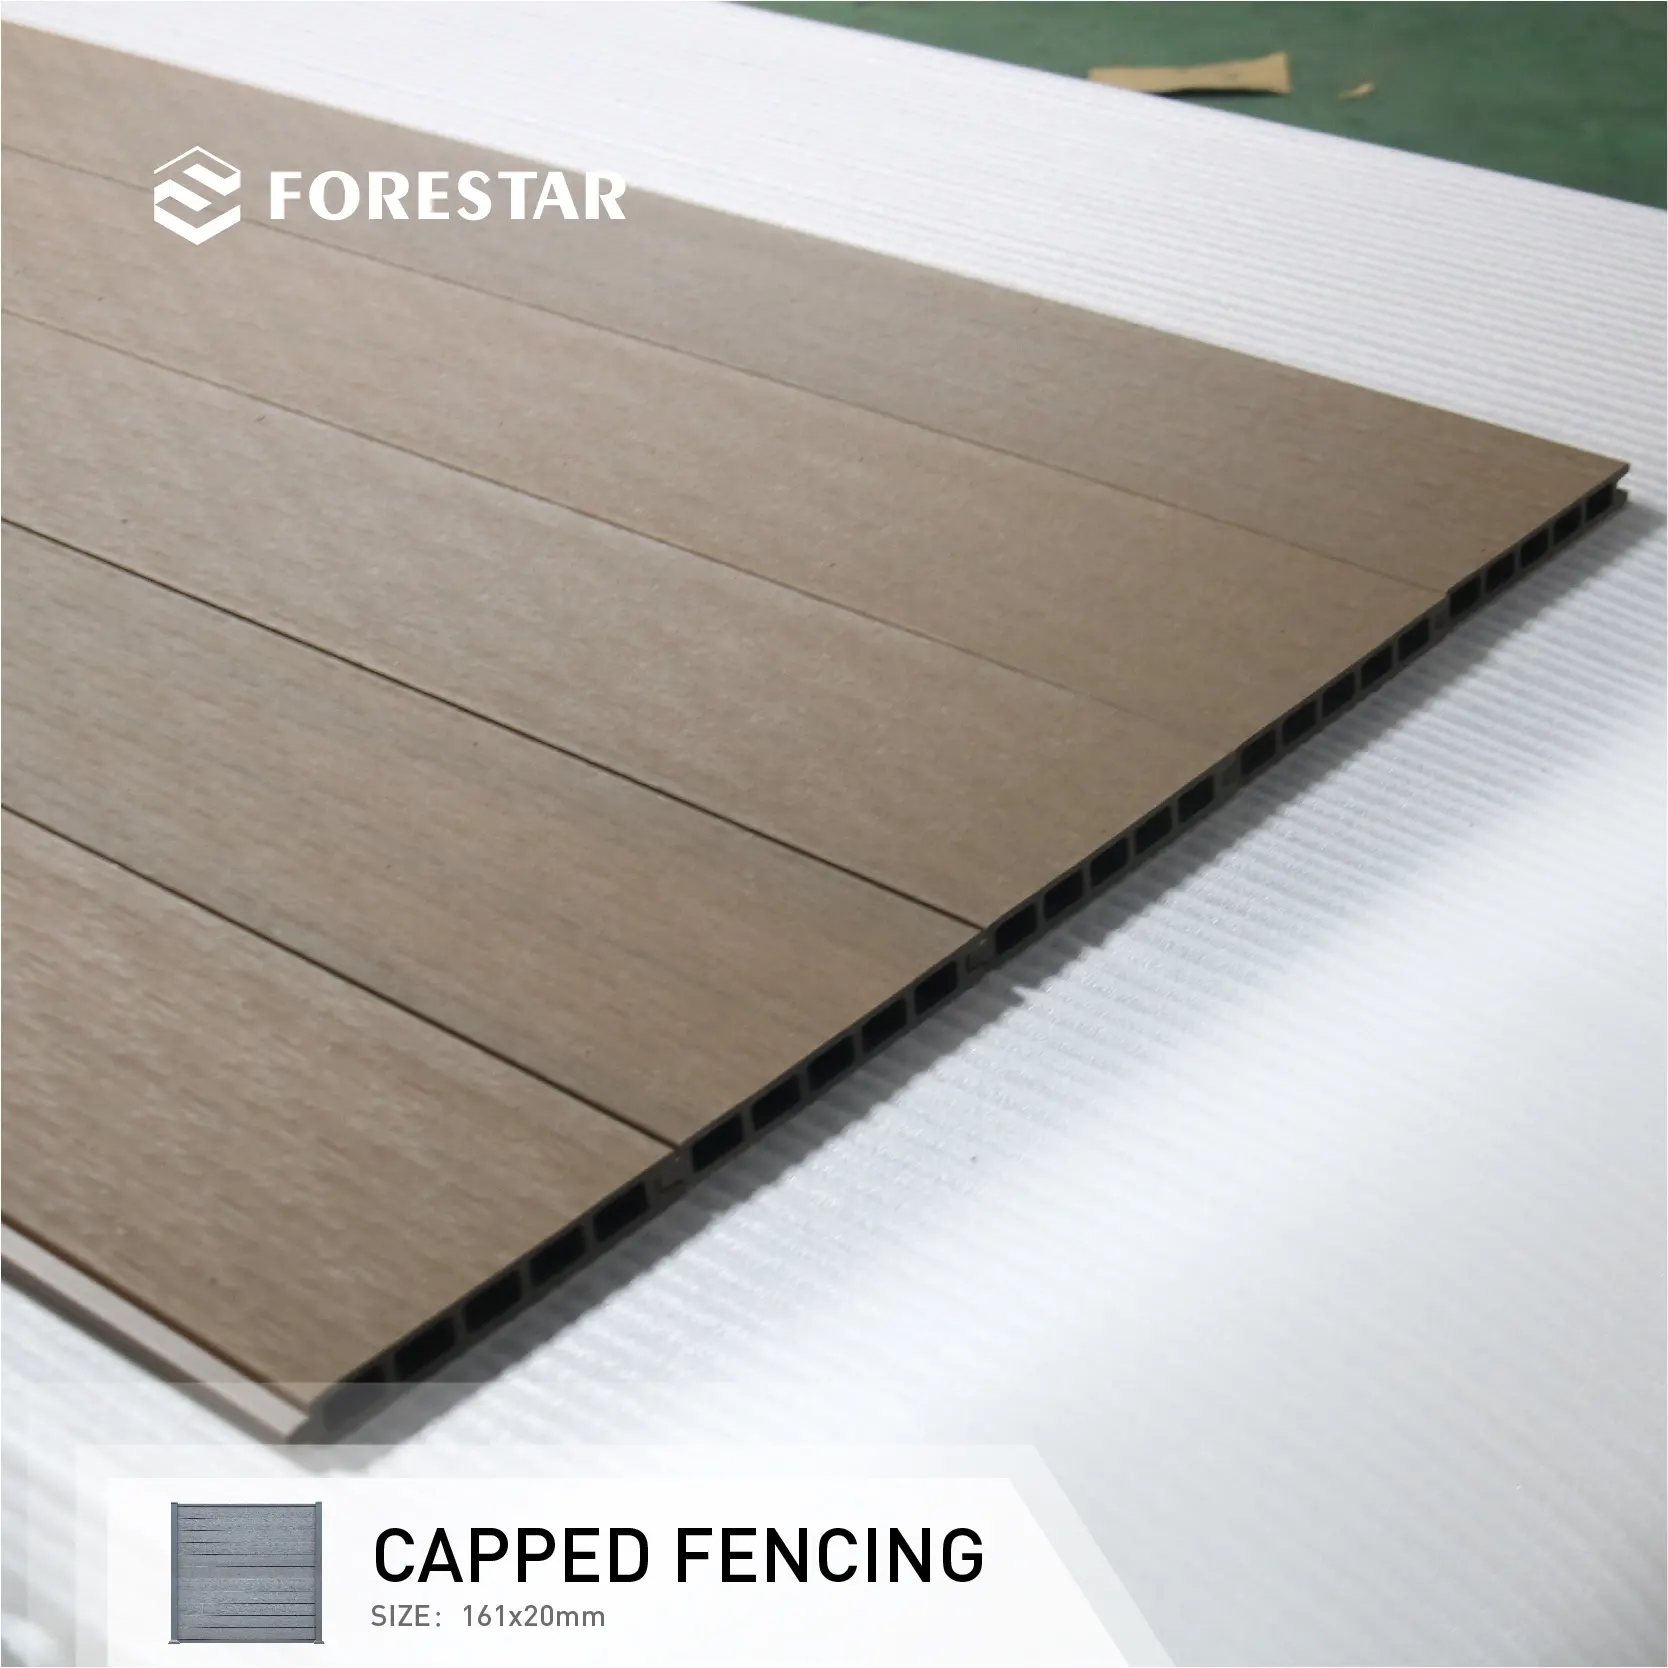 Security Fence With Peach Post Fireproof Wood Grain WPC Garden Privacy Fence Outdoor Fence Panels